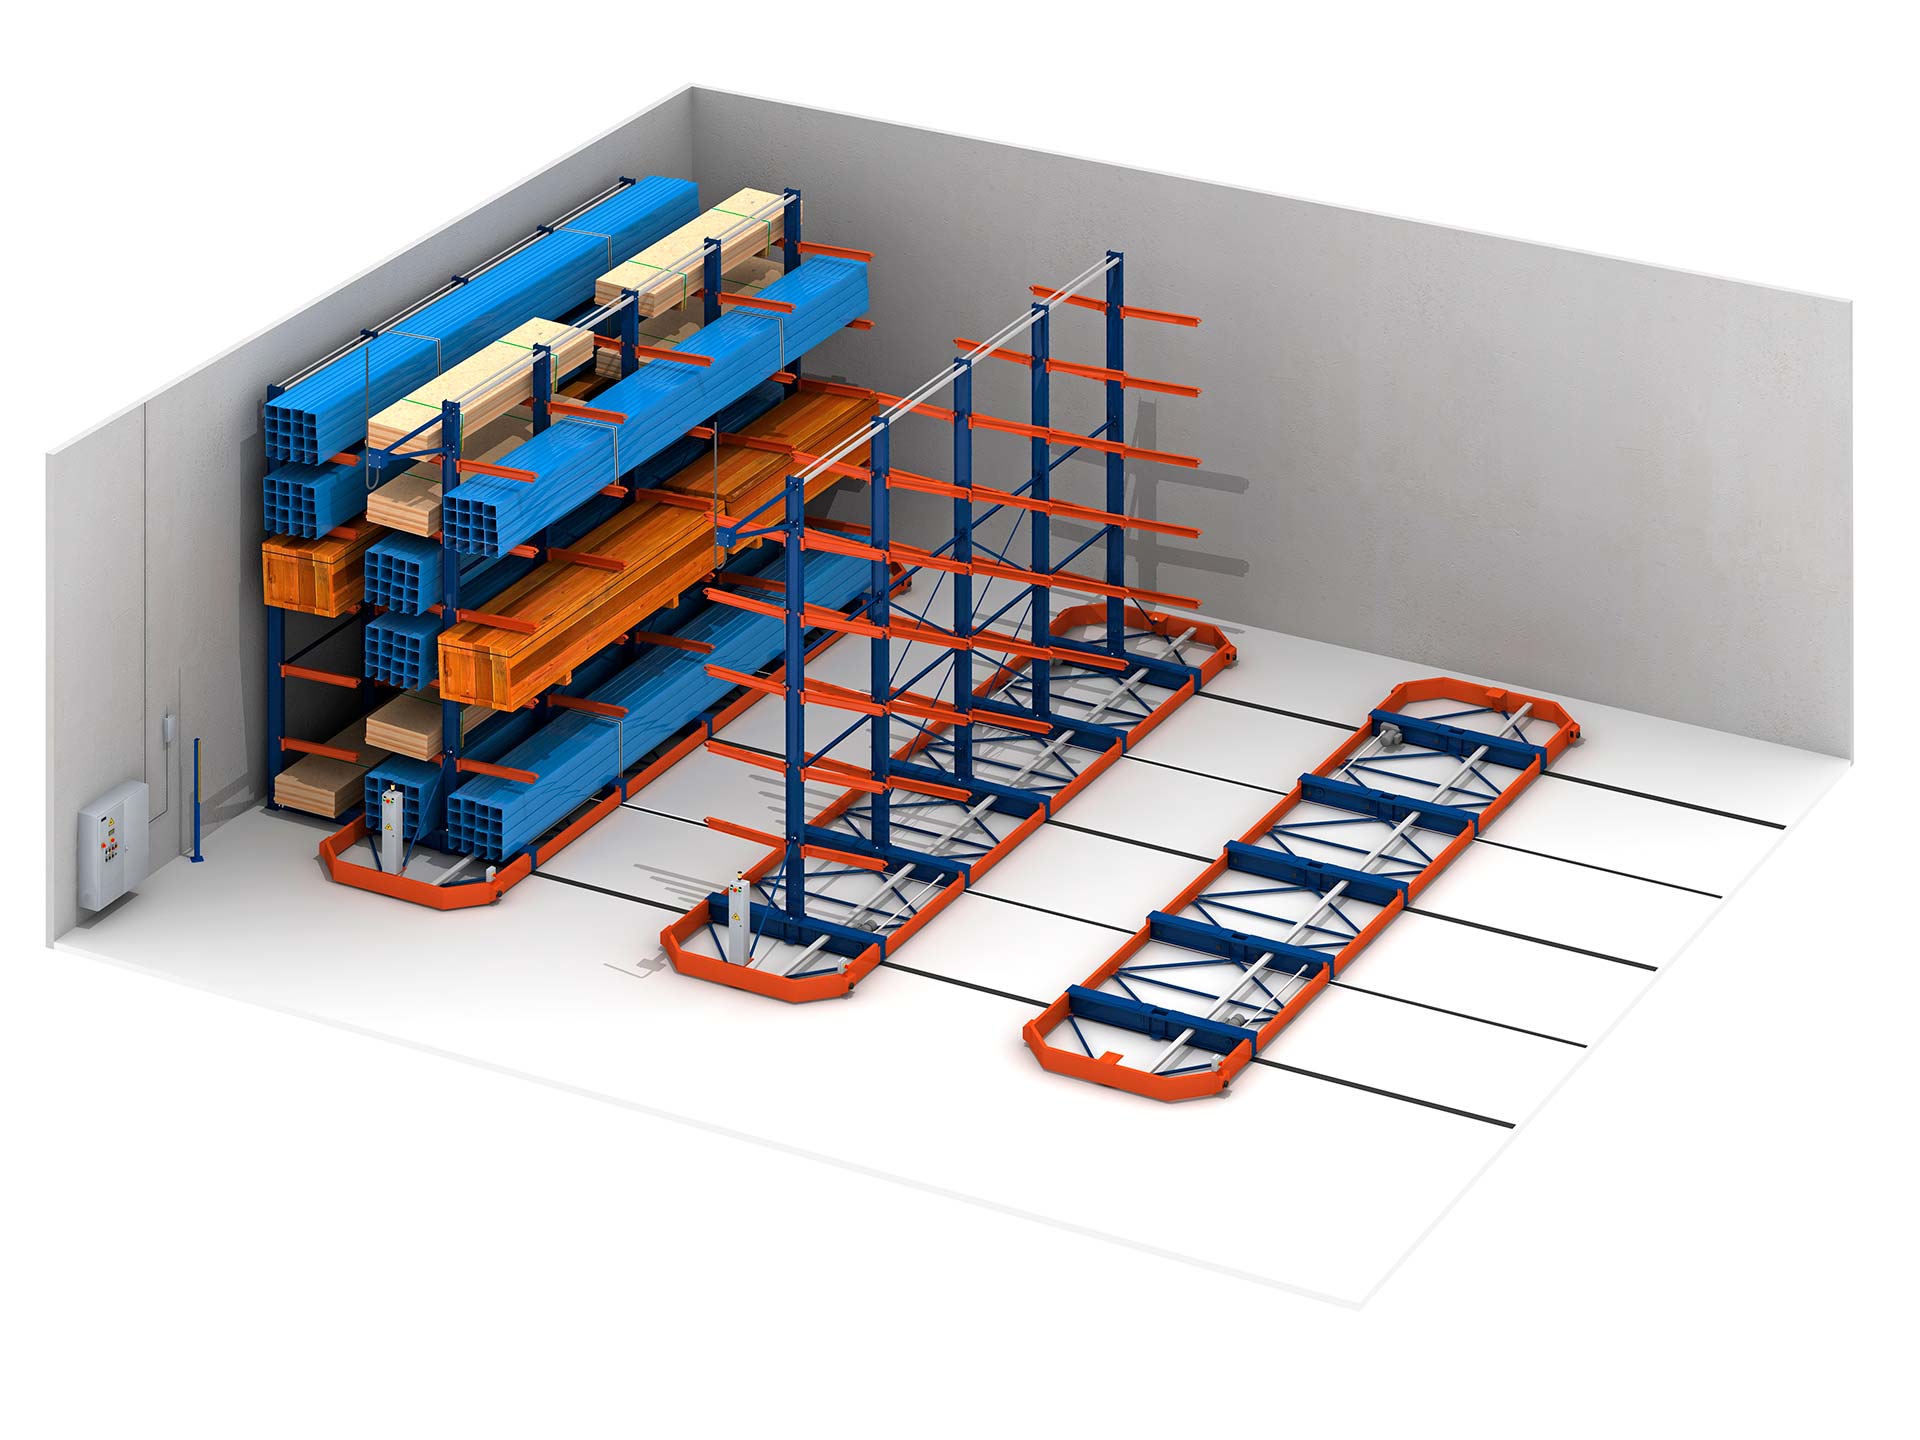 As in pallet racking, Movirack can include cantilever racks to store irregular-shaped products